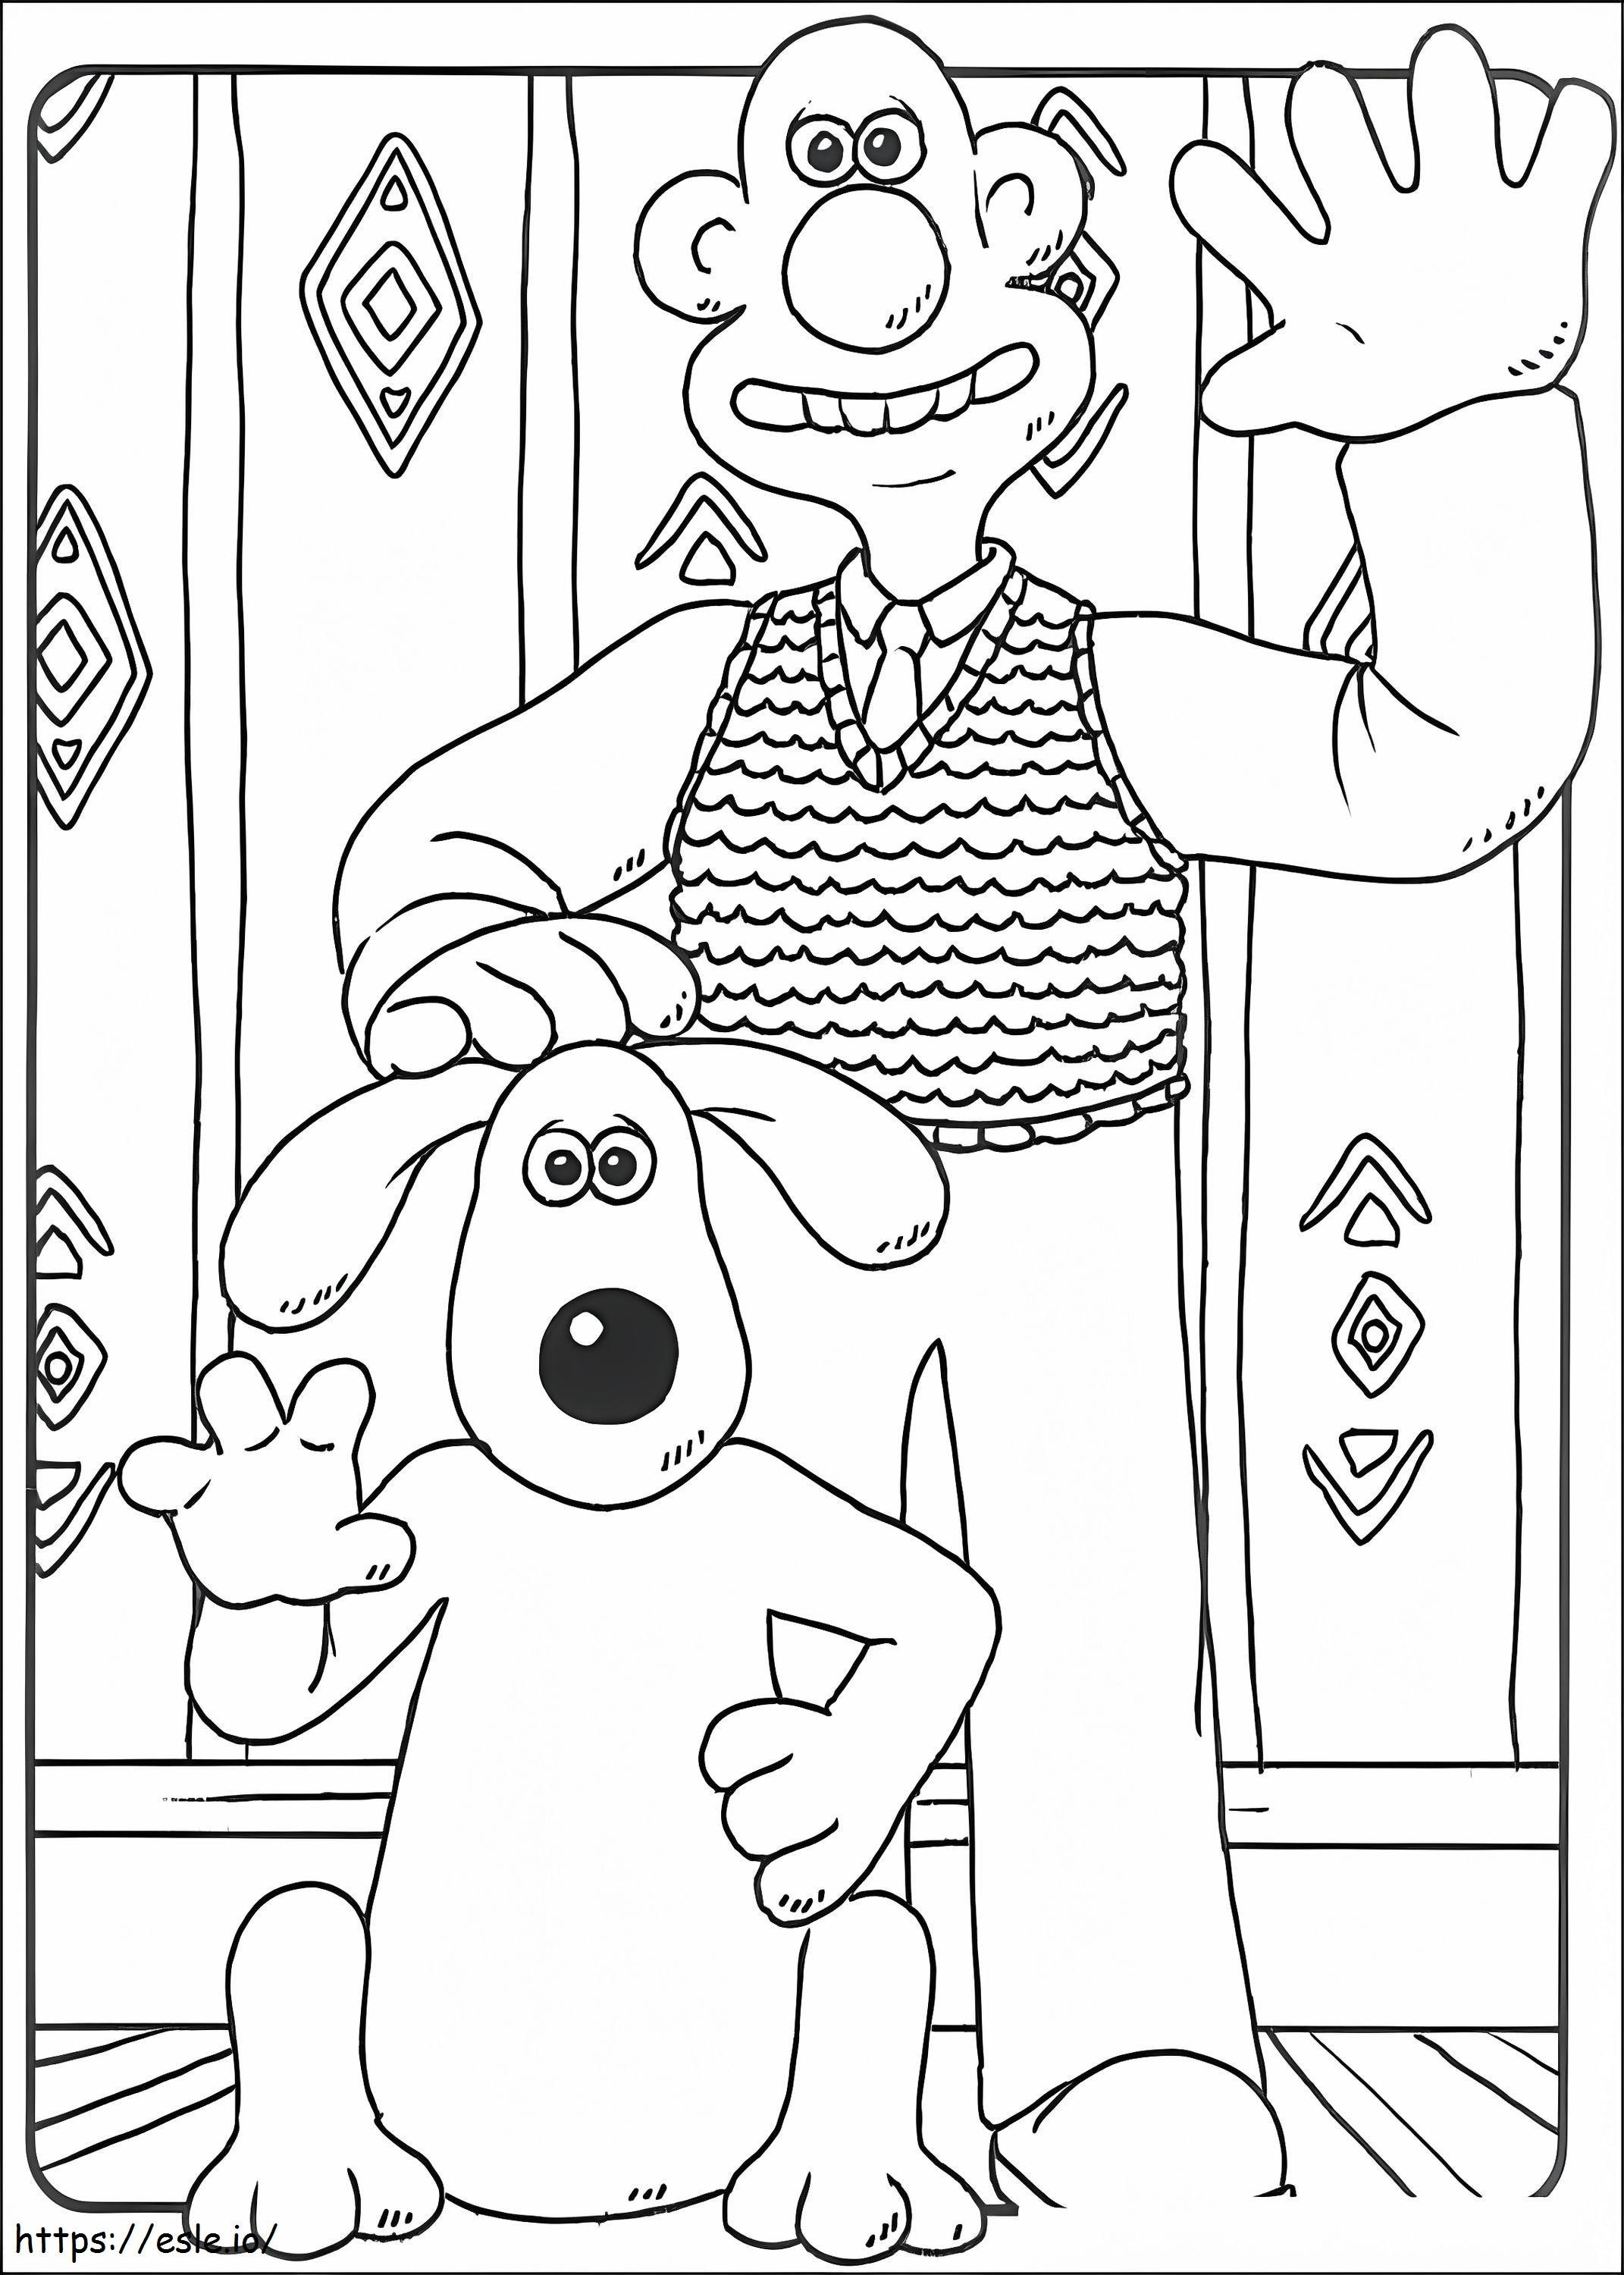 Happy Wallace And Gromit coloring page